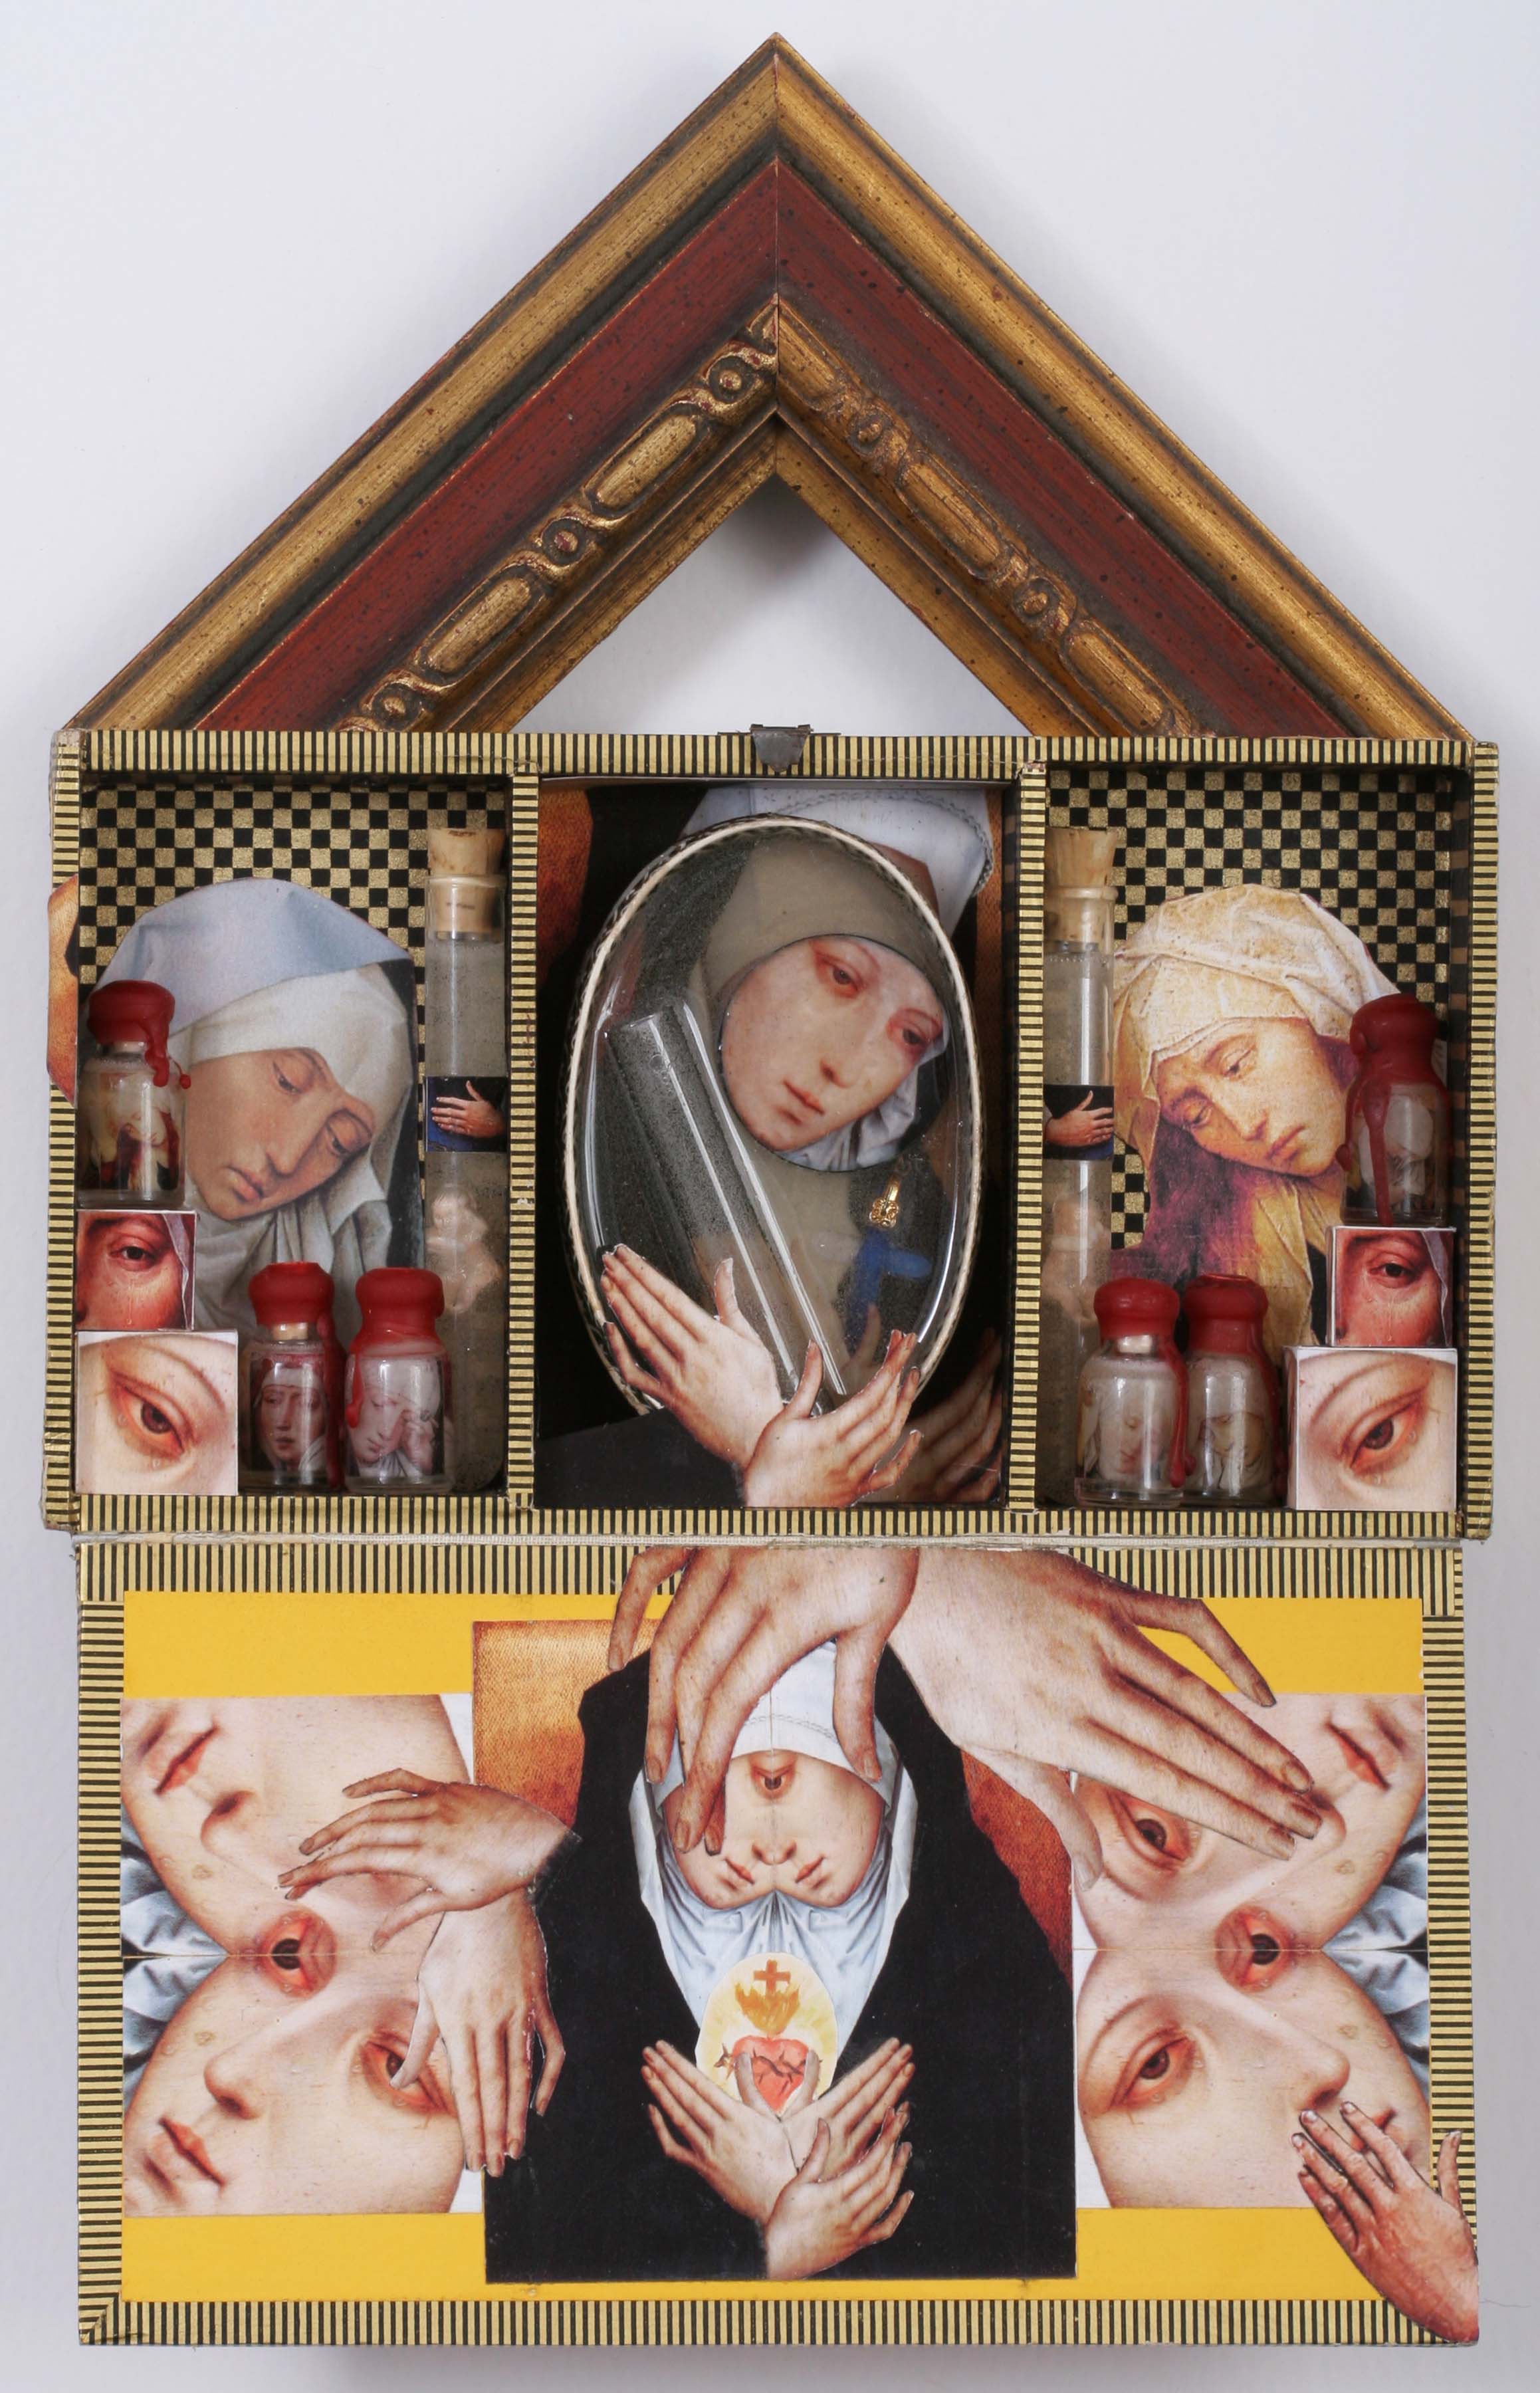     \"Lamentation\"
    mixed-media assemblage
    9.125 x 15 x 1.5
    2008
     SOLD
    Assemblage in cigar box with glass vials & test tubes, digitally altered scans on paper, wood cubes, glass cross, plastic baby charm, oval paper box, resin, frame sample, paper